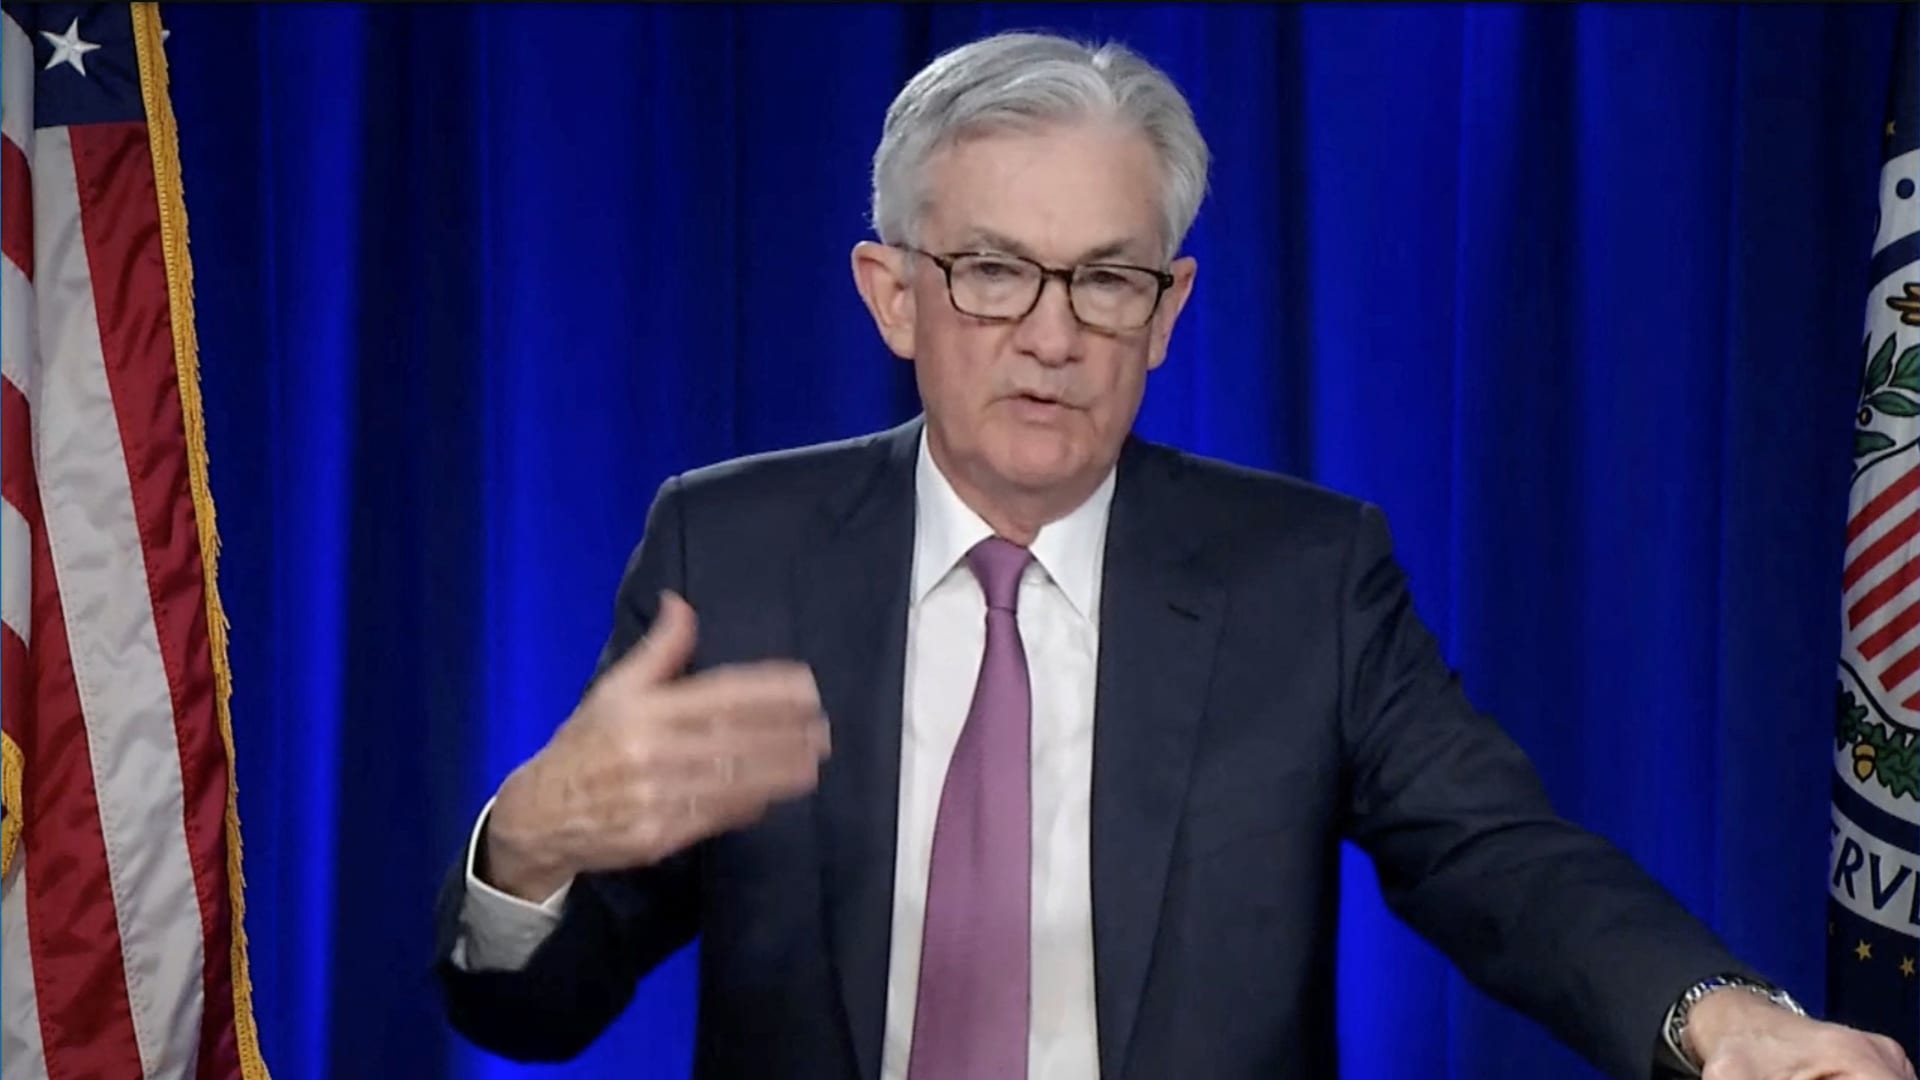 Powell says ‘inflation is much too high’ and the Fed will take ‘necessary steps’ to address